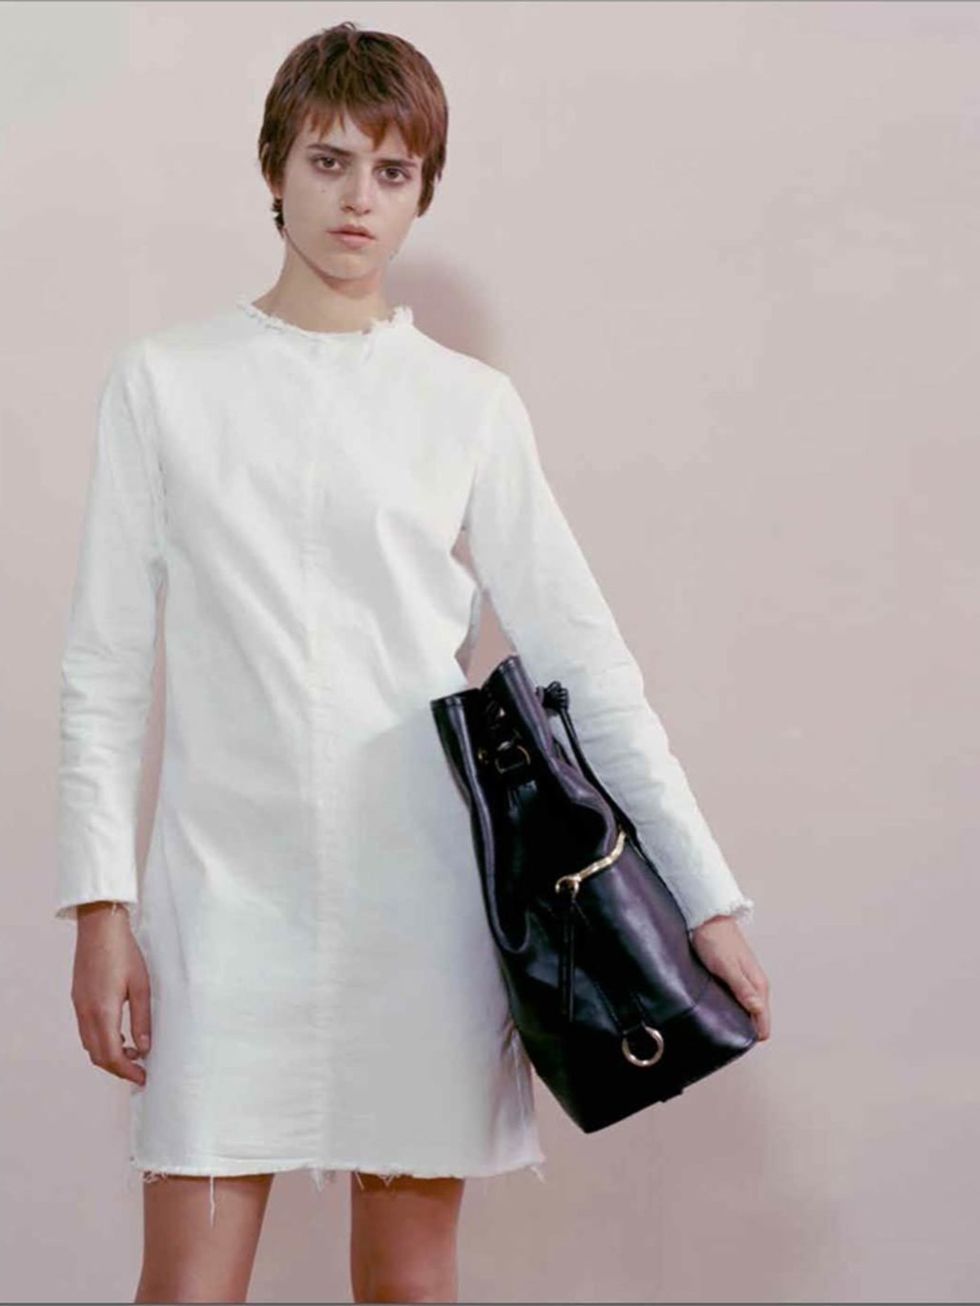 <p>Luxury pieces with a skater girl vibe? Sold. Aries is a partnership between Sofia Maria Prantera, founder of Silas, and Fergus Purcell, graphic designer for Palace skateboards and MBMJ - so its cool credentials are genuine.</p>

<p><a href="http://www.